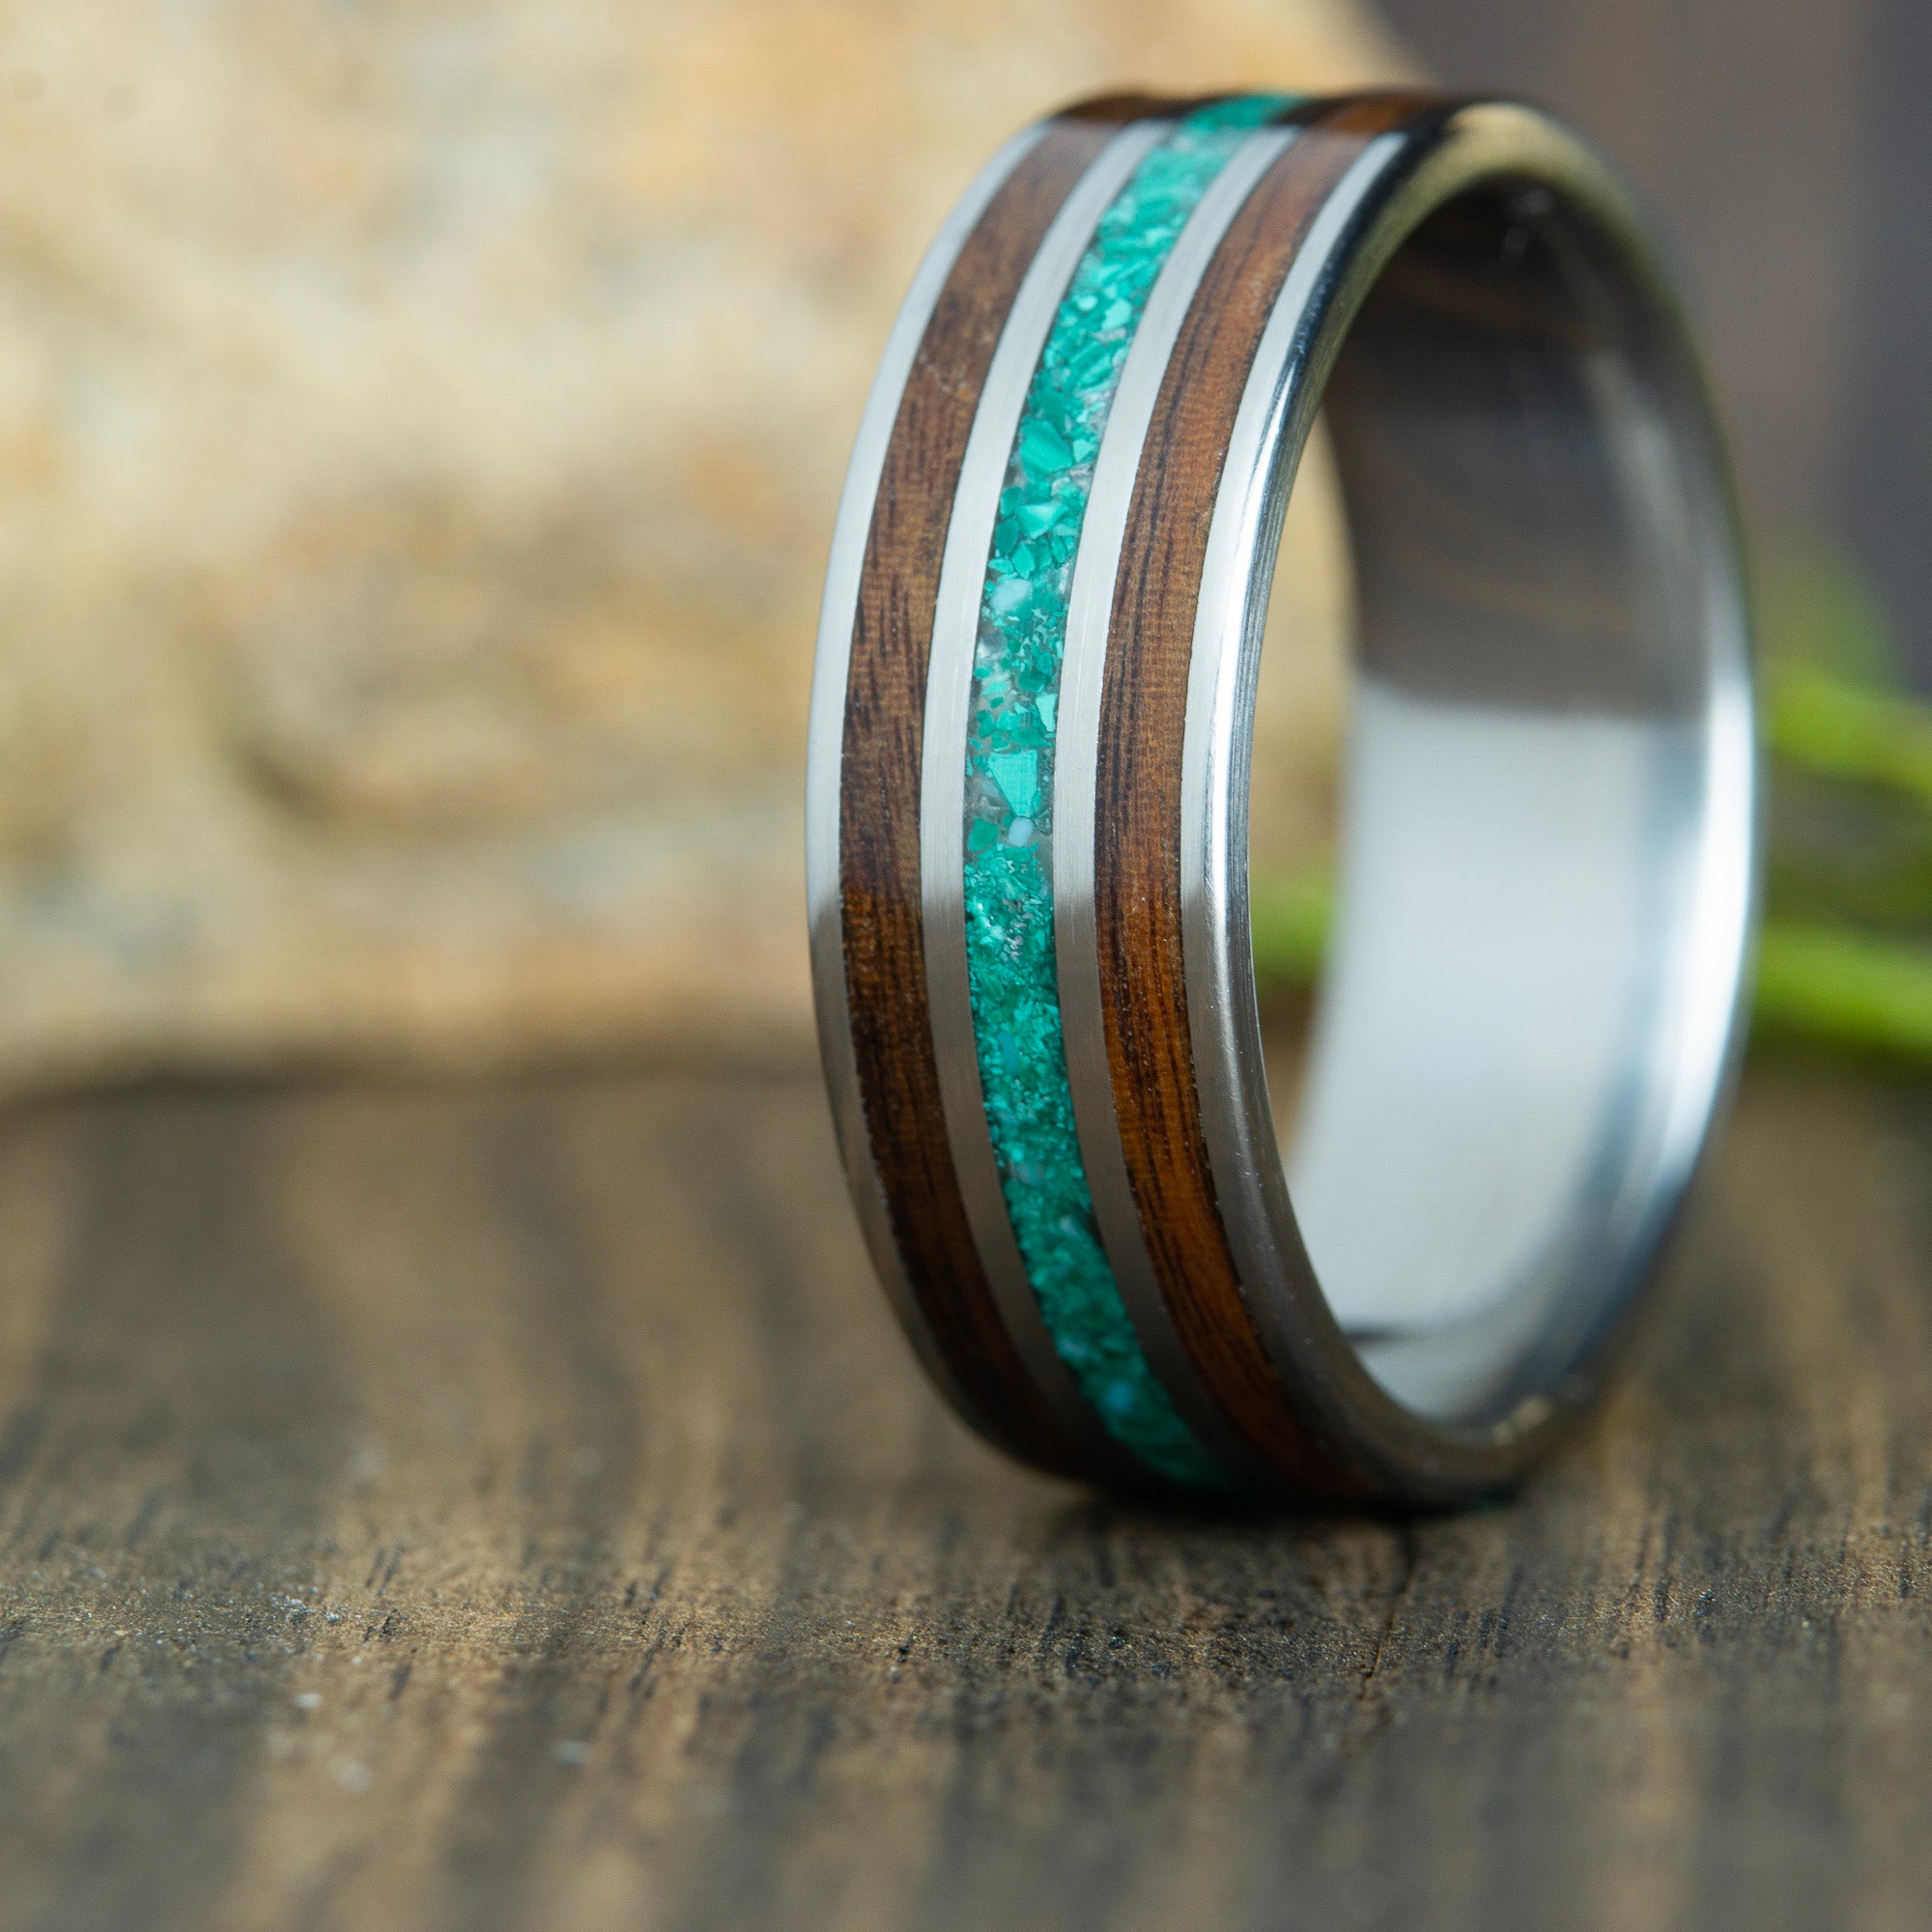 Rosewood ring with Malachite stone